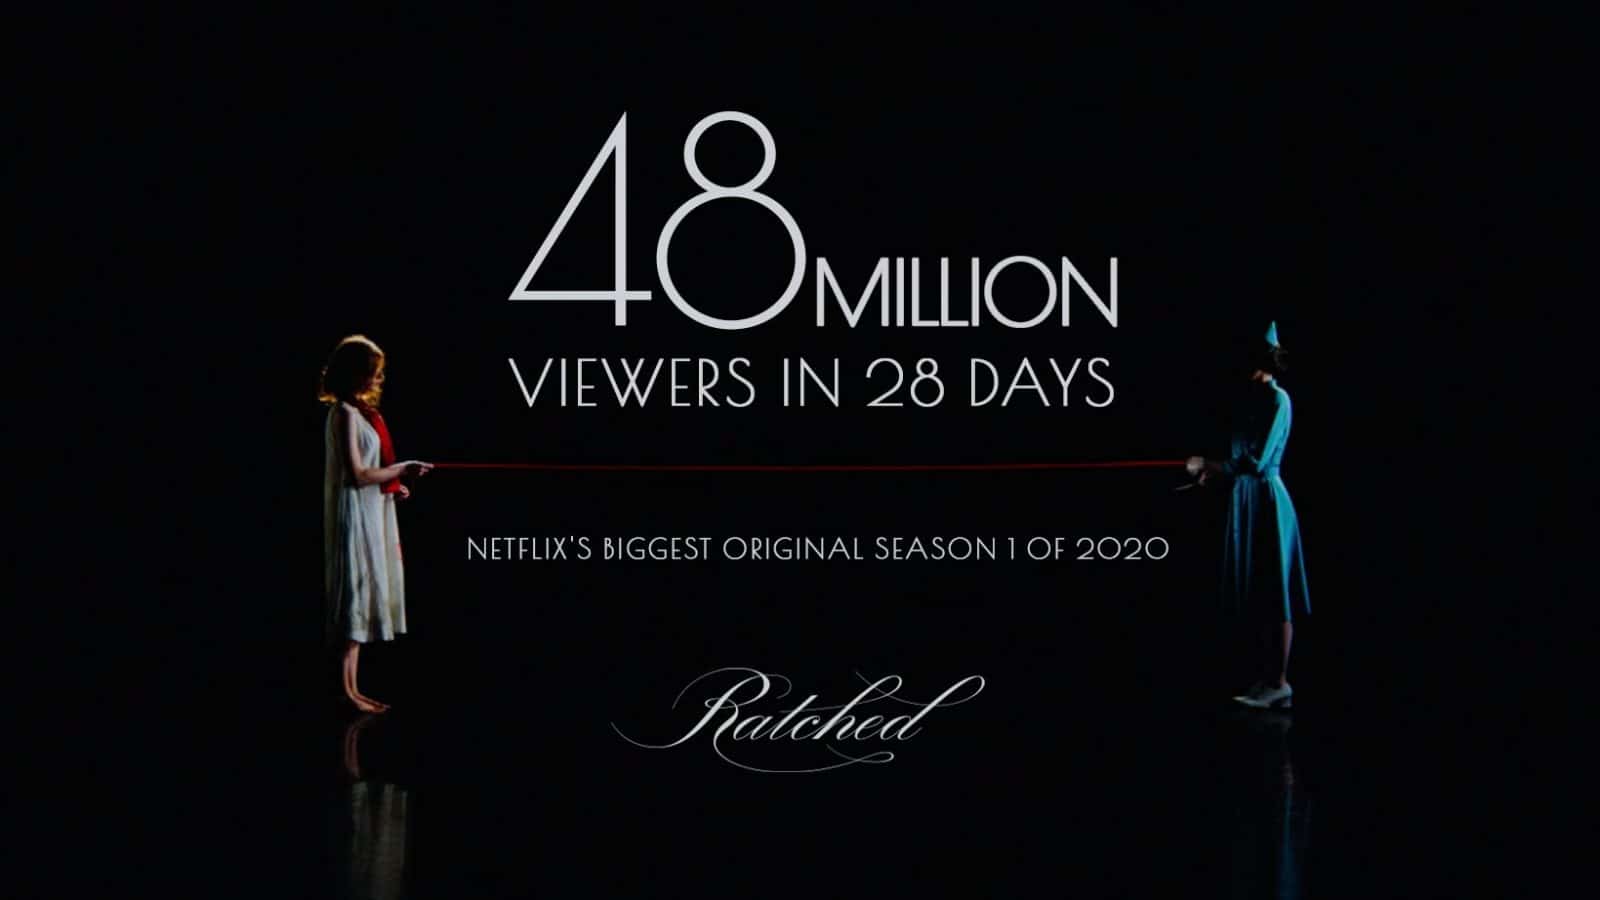 Ratched becomes Netflix highest watched season 1 of 2020 with 48 million veiwers